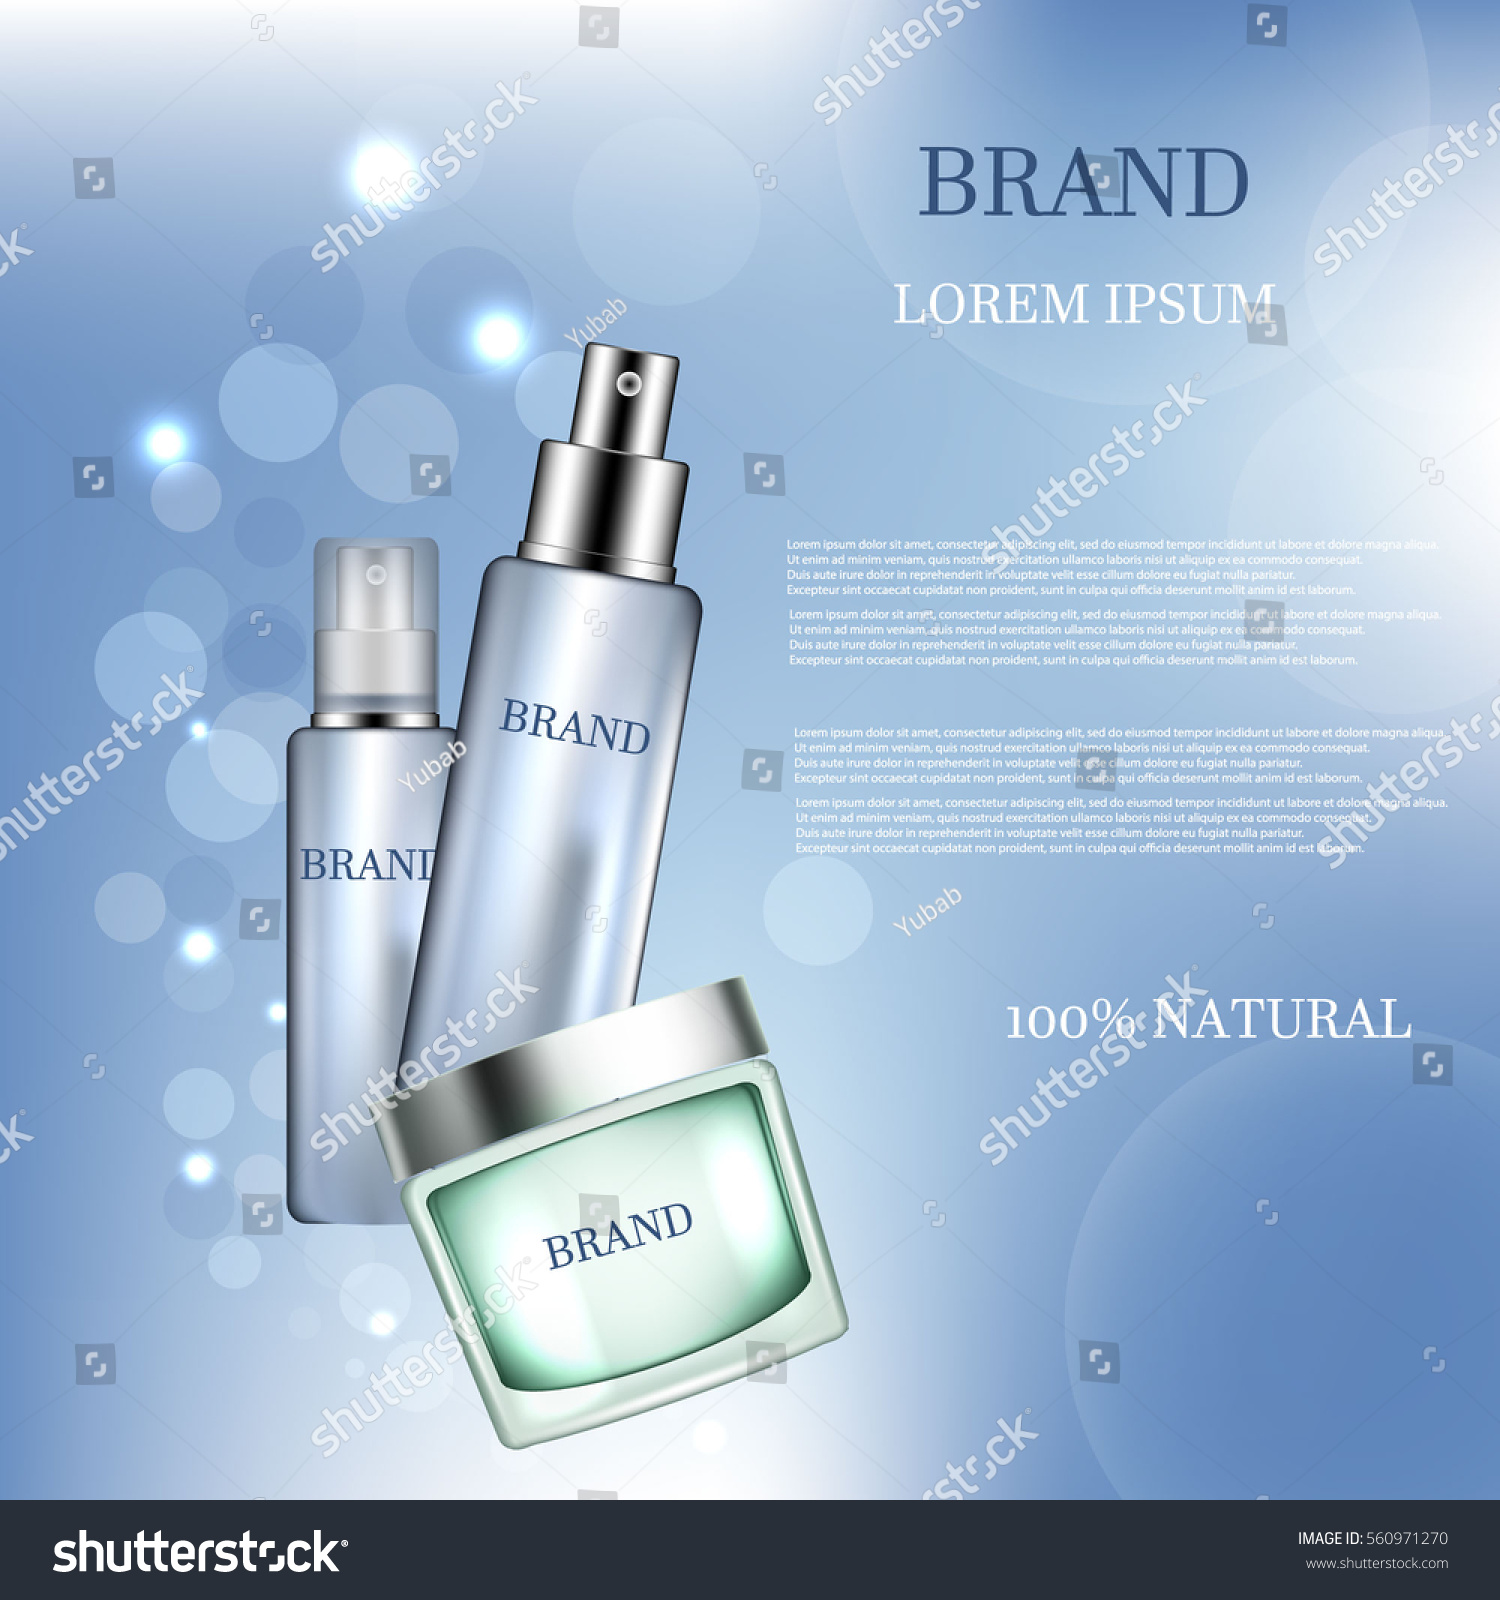 Facial cream and lotion. 3D illustration. #560971270